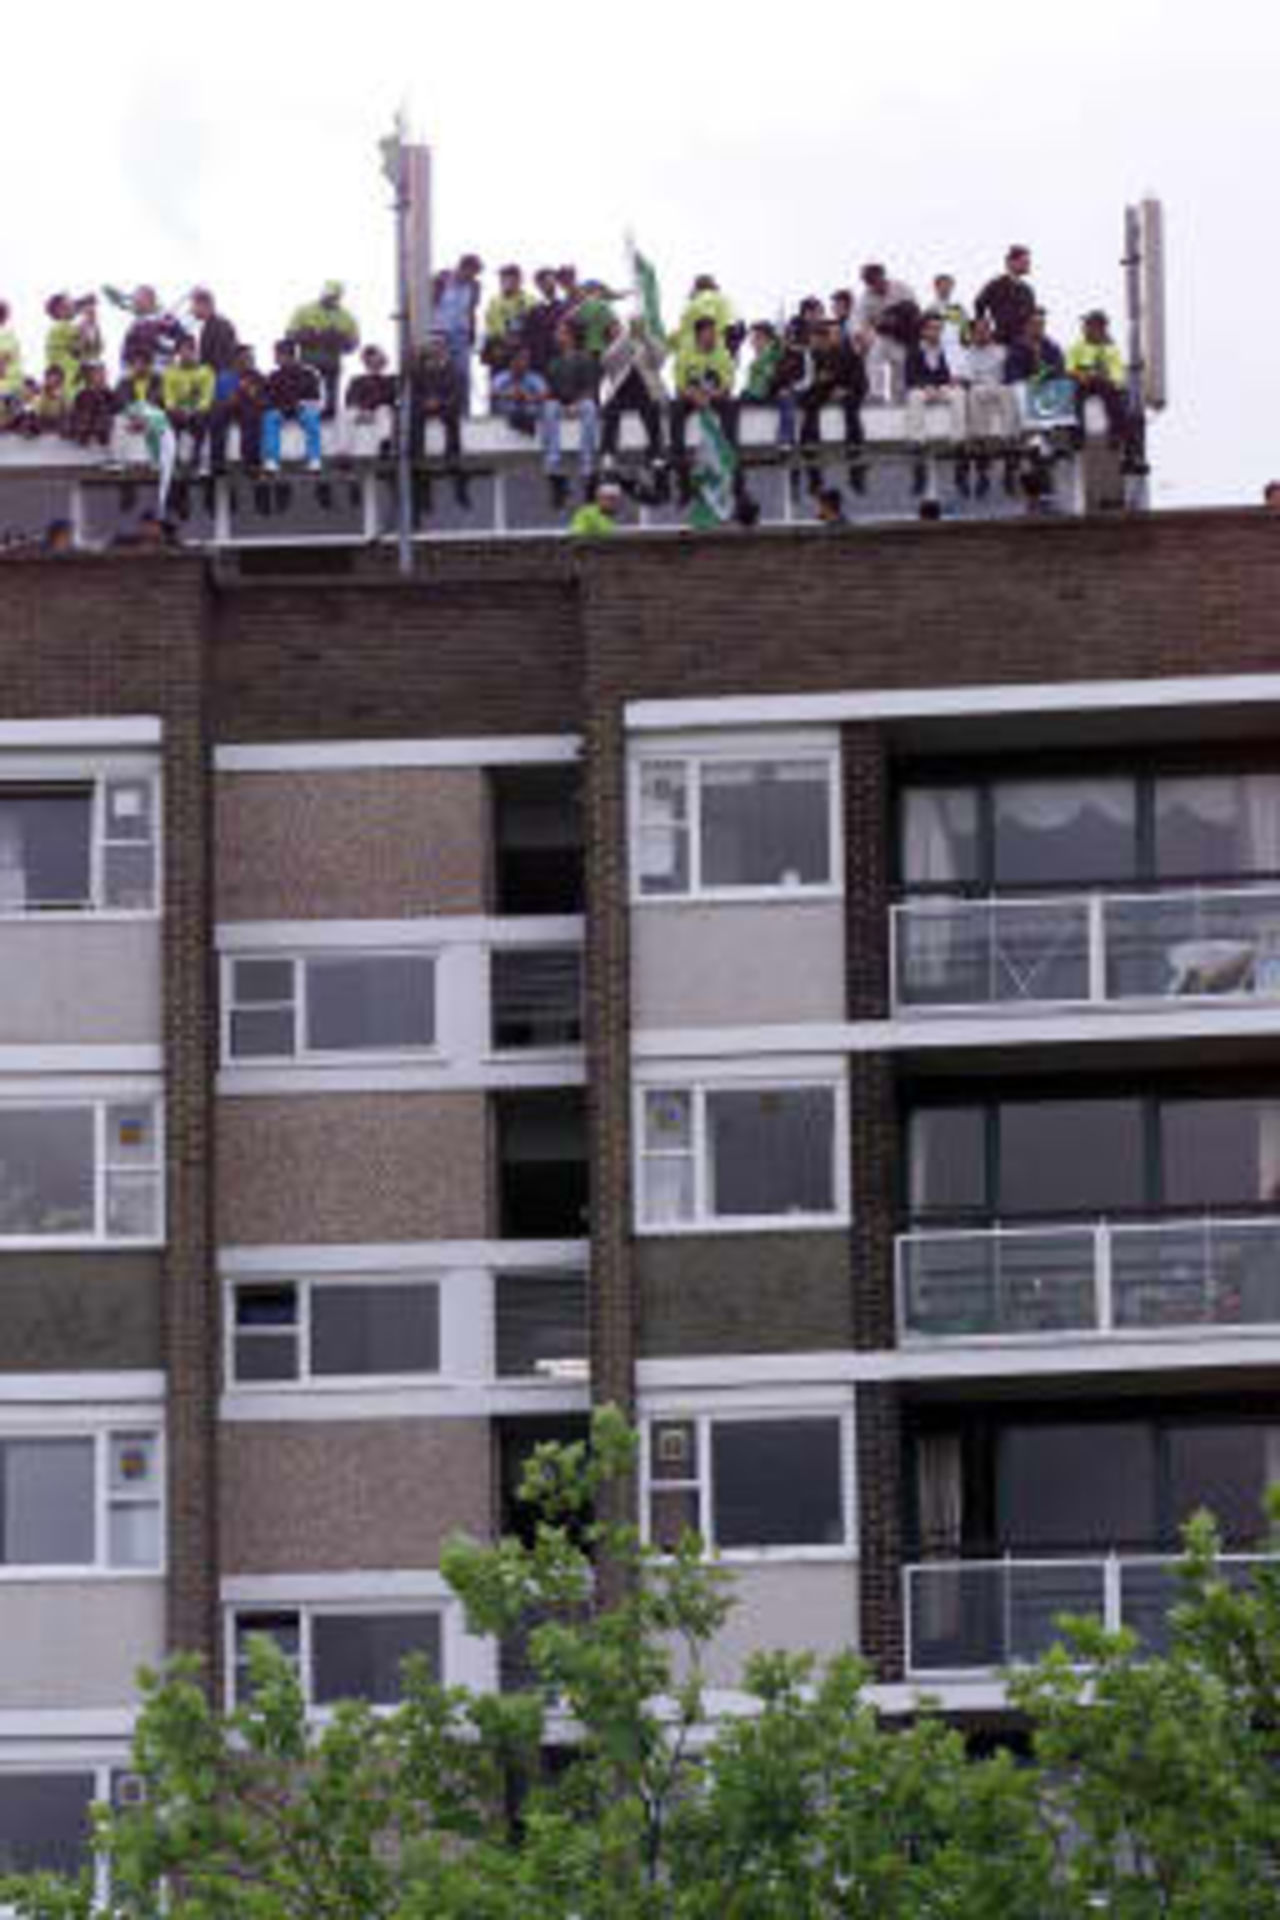 Pakistan fans watching  the World Cup Cricket Final between Australia and Pakistan from an overlooking block of flats , Sunday June 20,1999 , at Lords, London